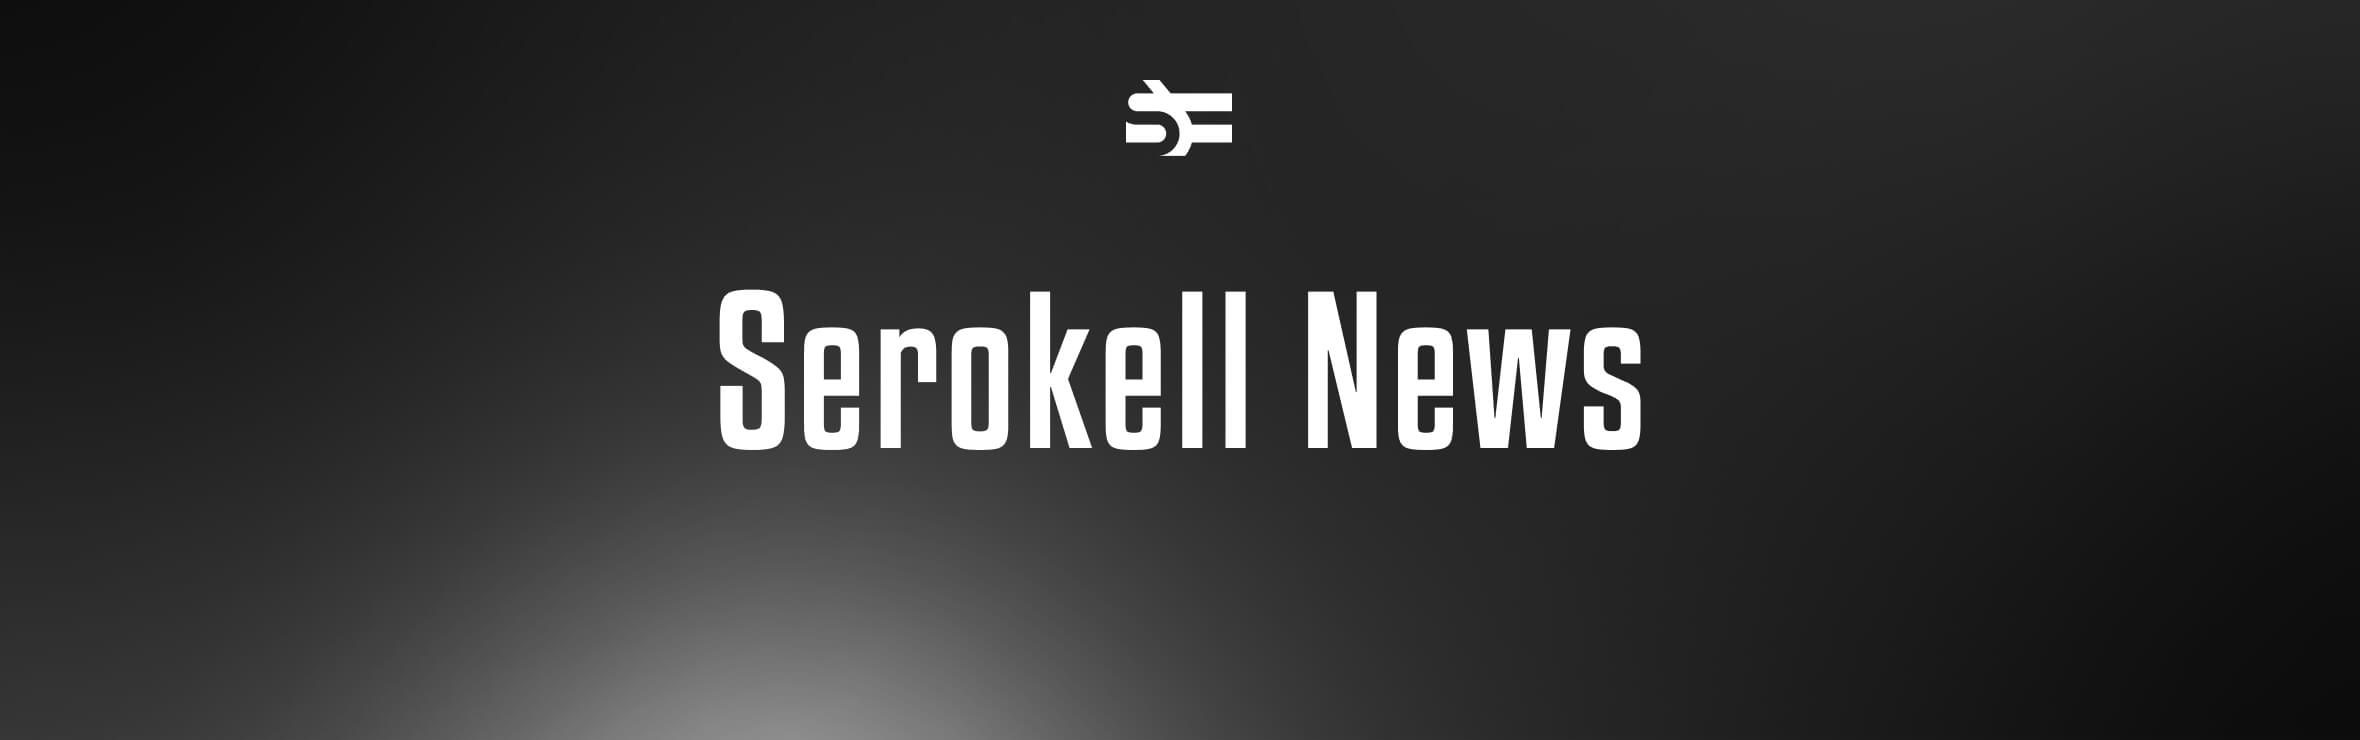 Serokell listed among the top US IT service companies